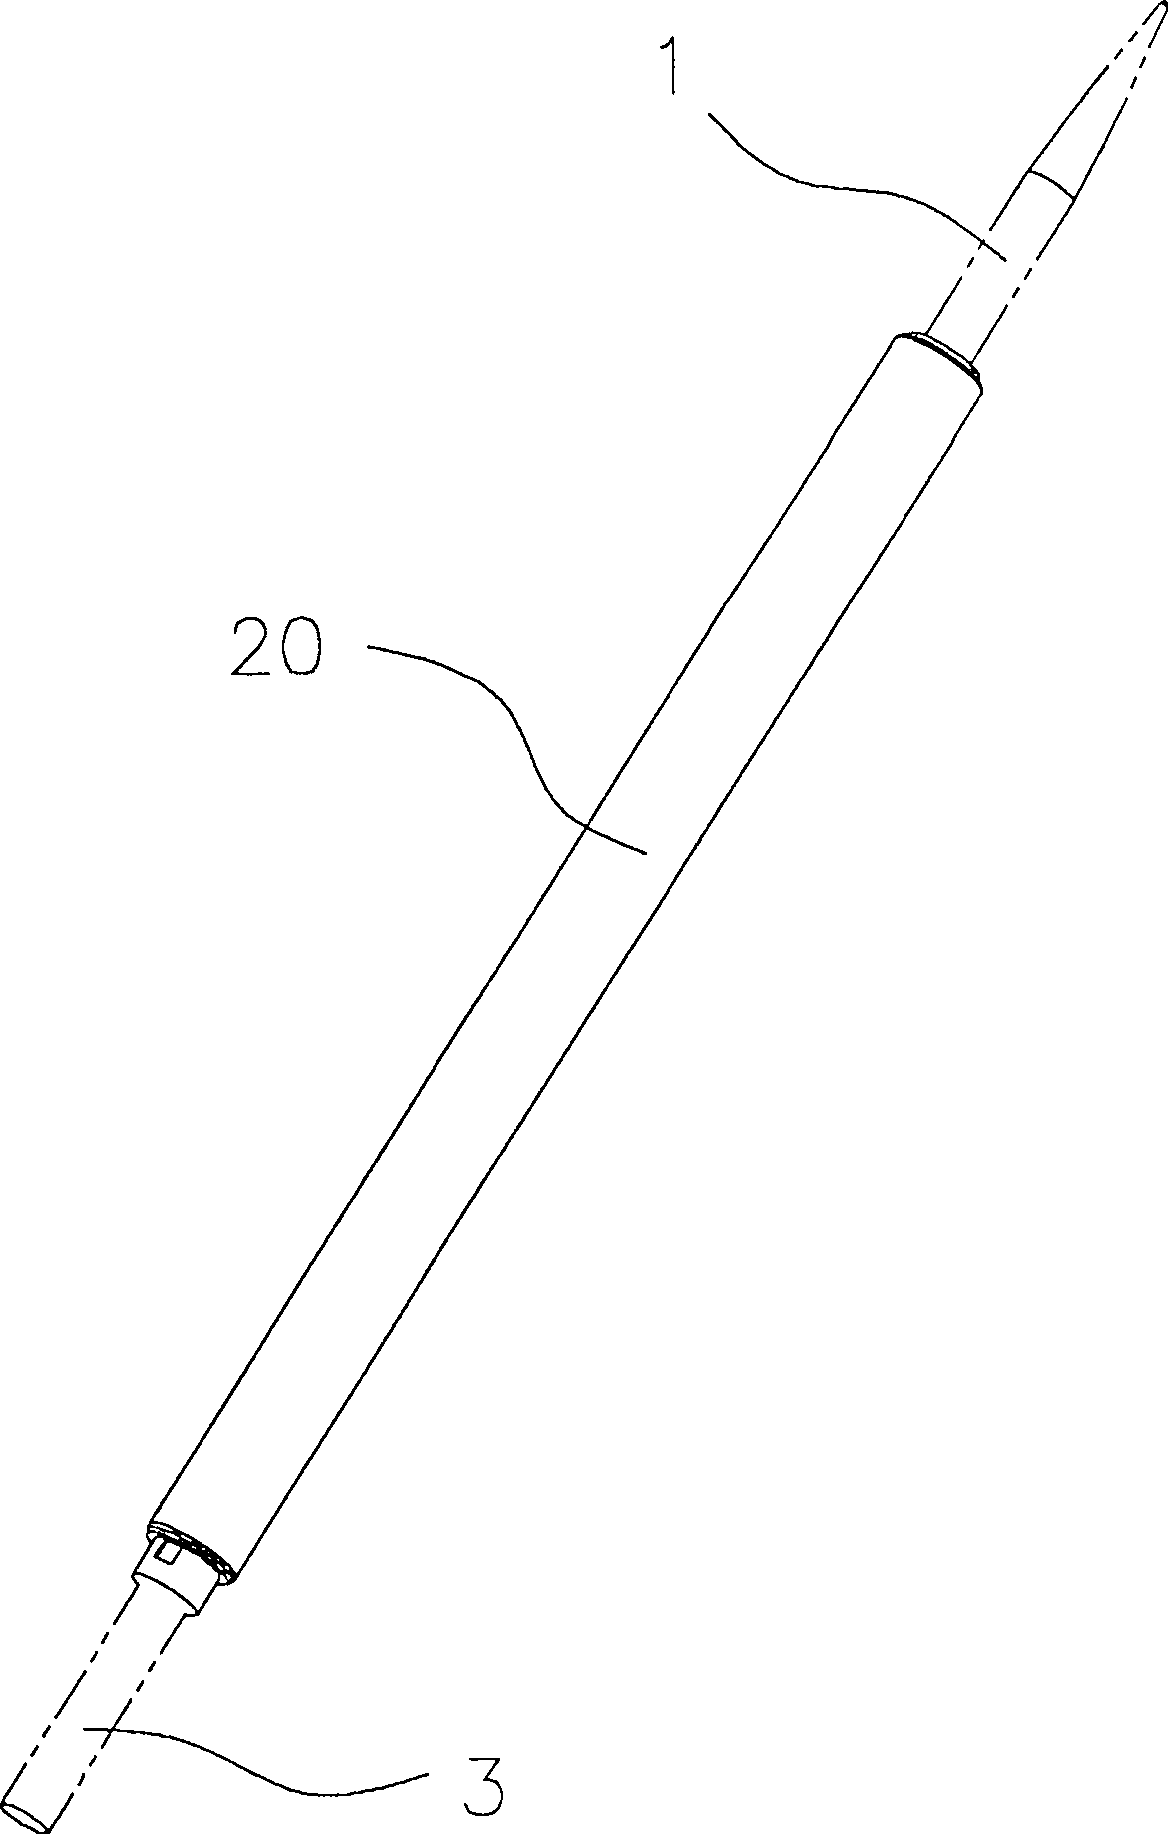 Injection molding method for stylus